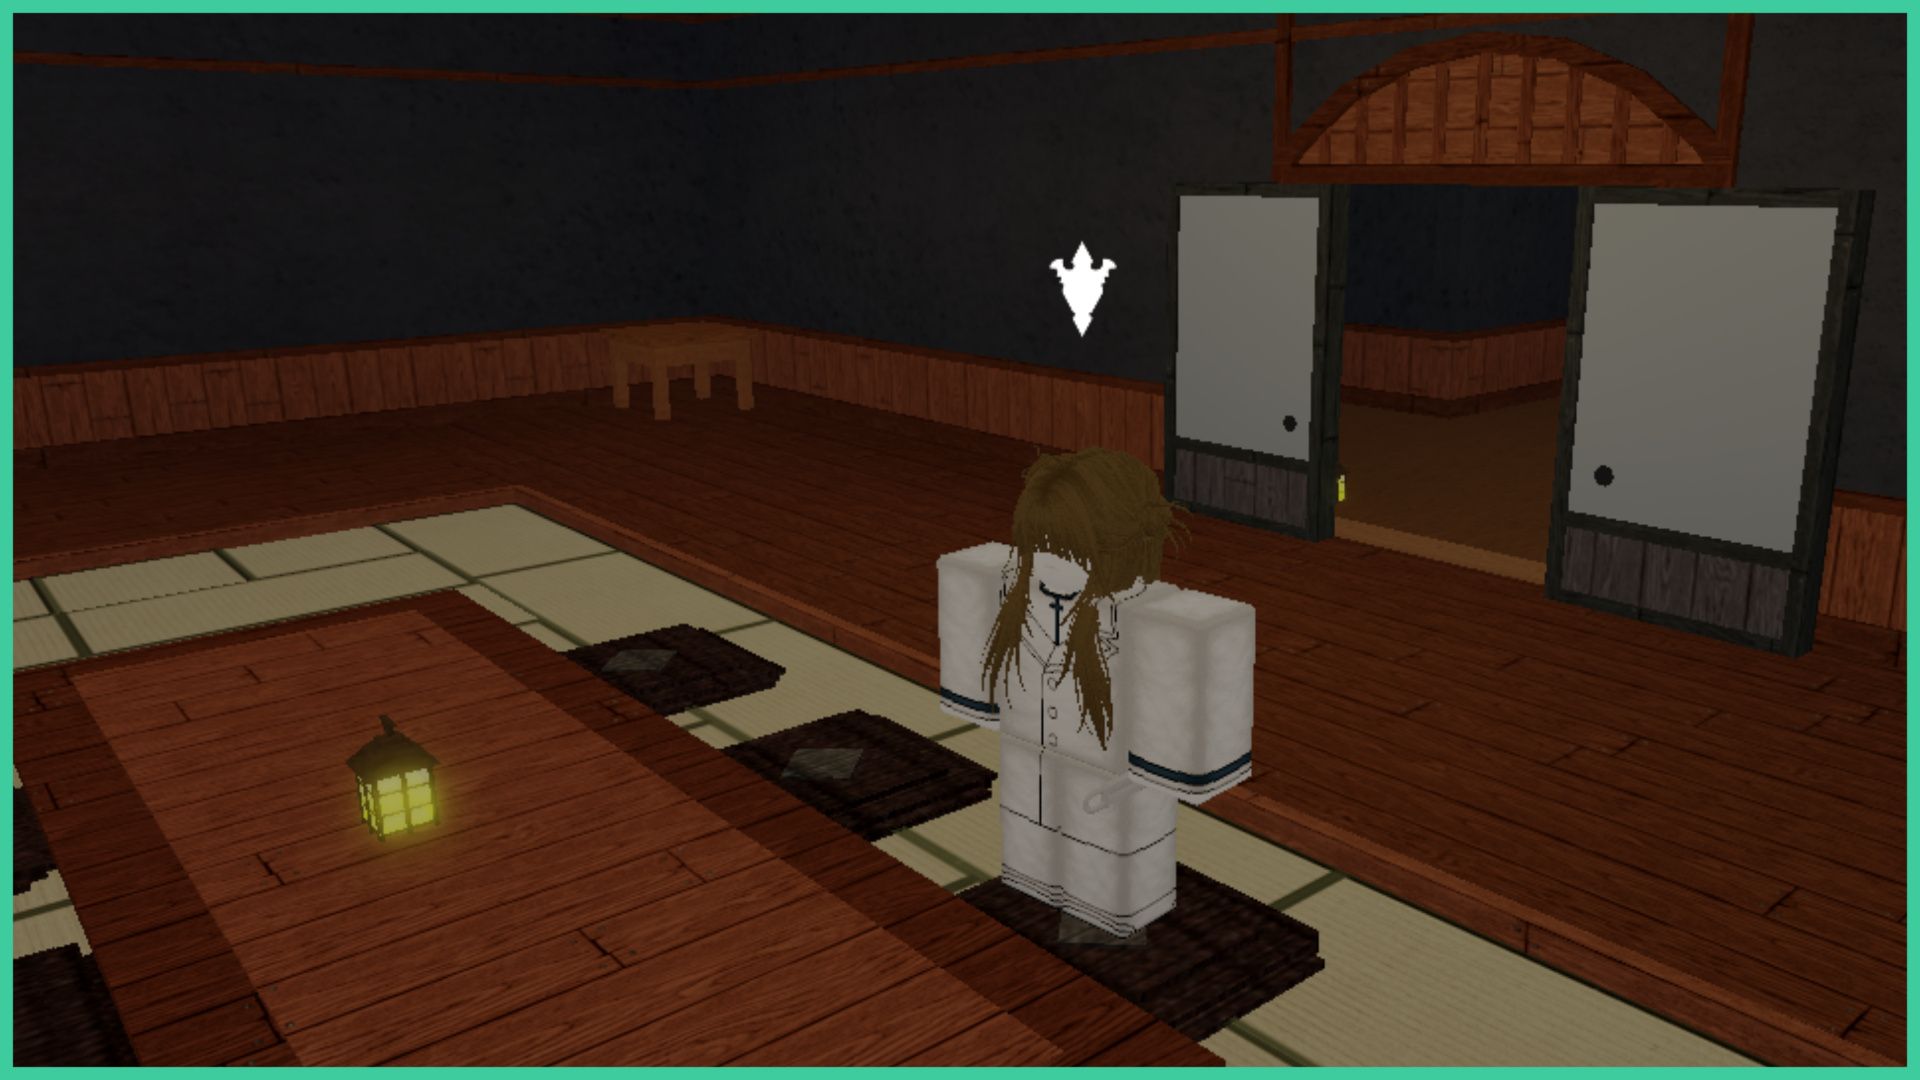 feature image for our type soul letzt stil guide, the image is a screenshot from inside a building, with a long table with a light in the middle, as well as cushions on the floor on the tatami mat where a roblox player is standing, there are sliding doors that lead to a corridor